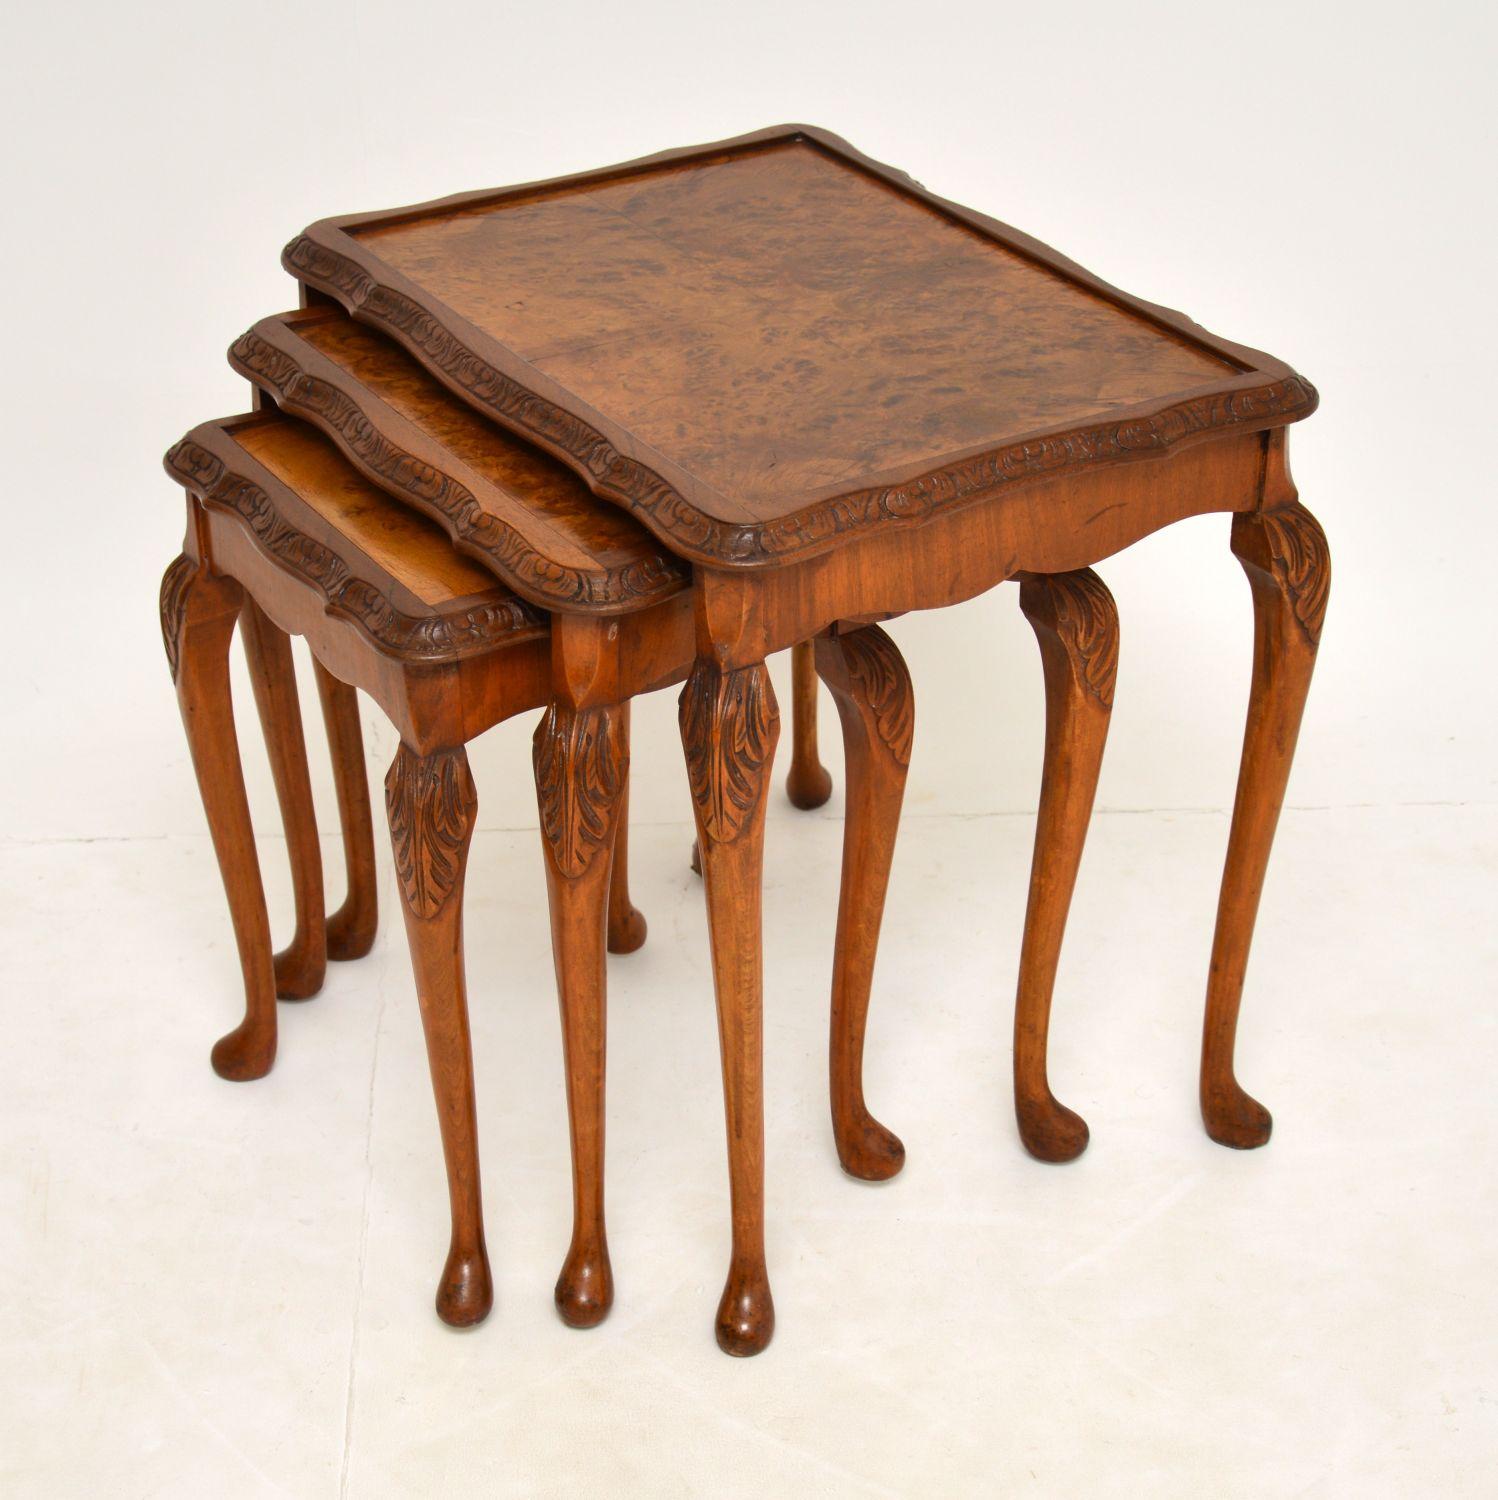 A beautiful burr walnut nest of three tables in the antique Queen Anne style. These date from around the 1930' period.

The quality is superb, with lovely carving around the edges. They are built from solid wood, with stunning burr walnut veneers